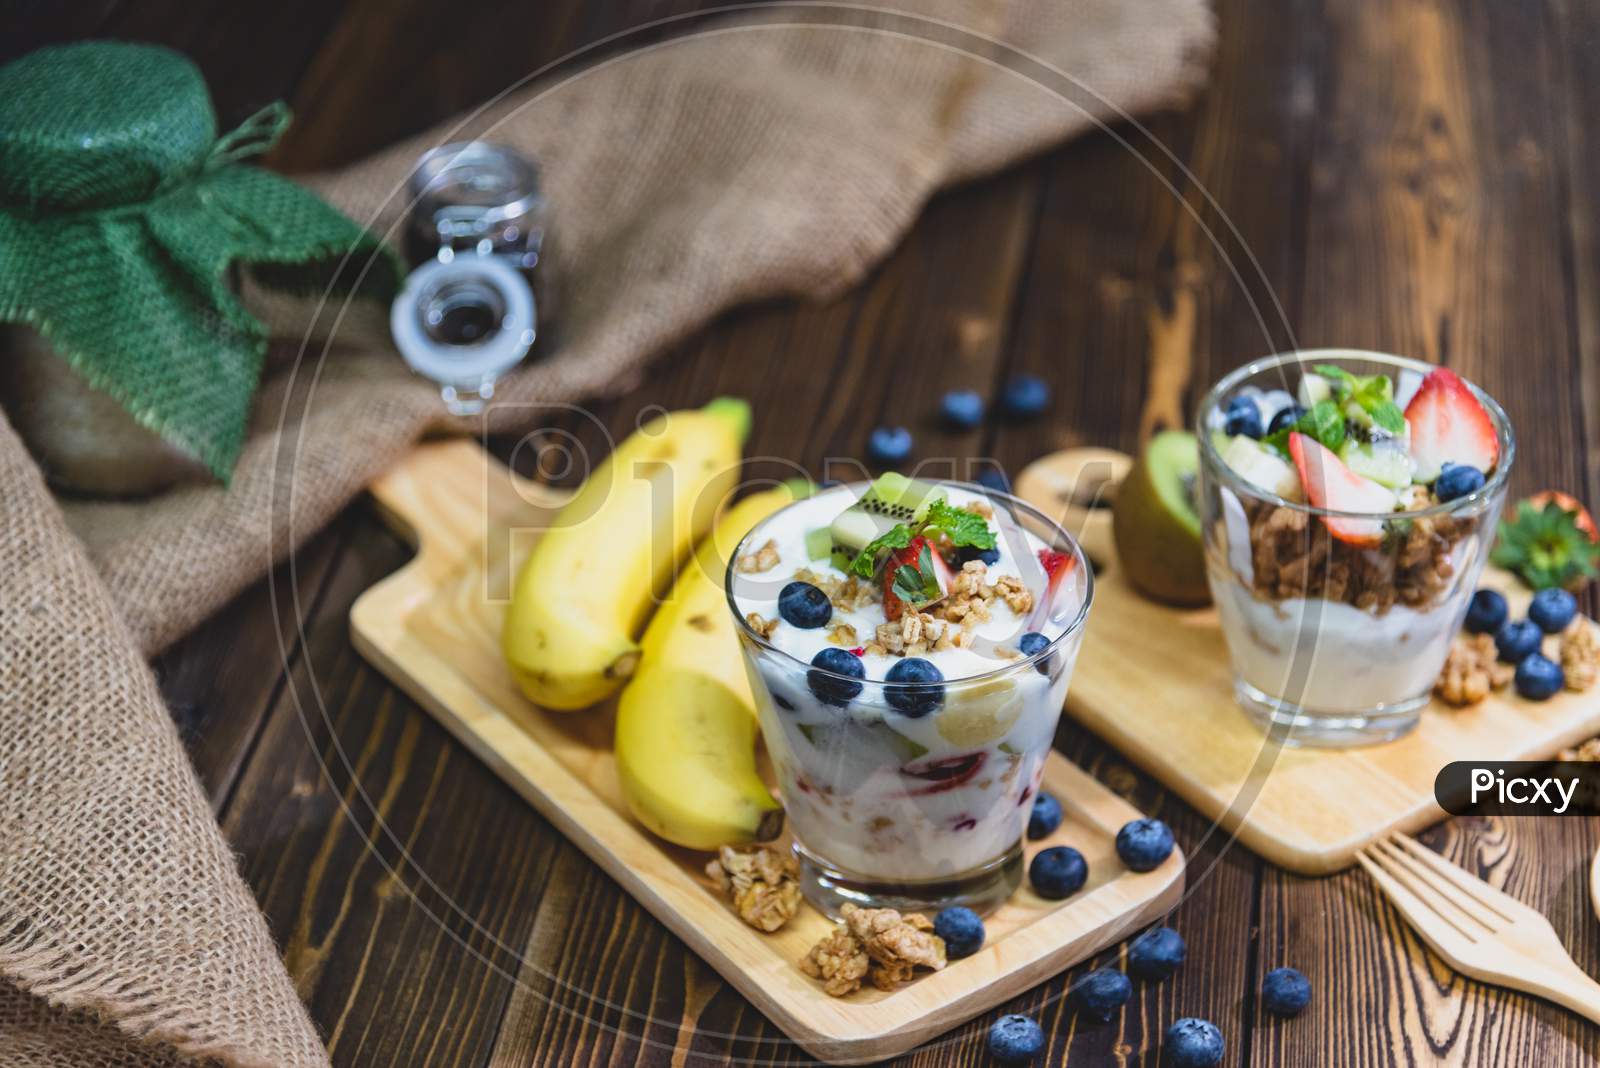 Healthy Greek Yogurt With Granola And Mixed Berries On Wooden Table And Many Fruits. Food And Dessert Concept.